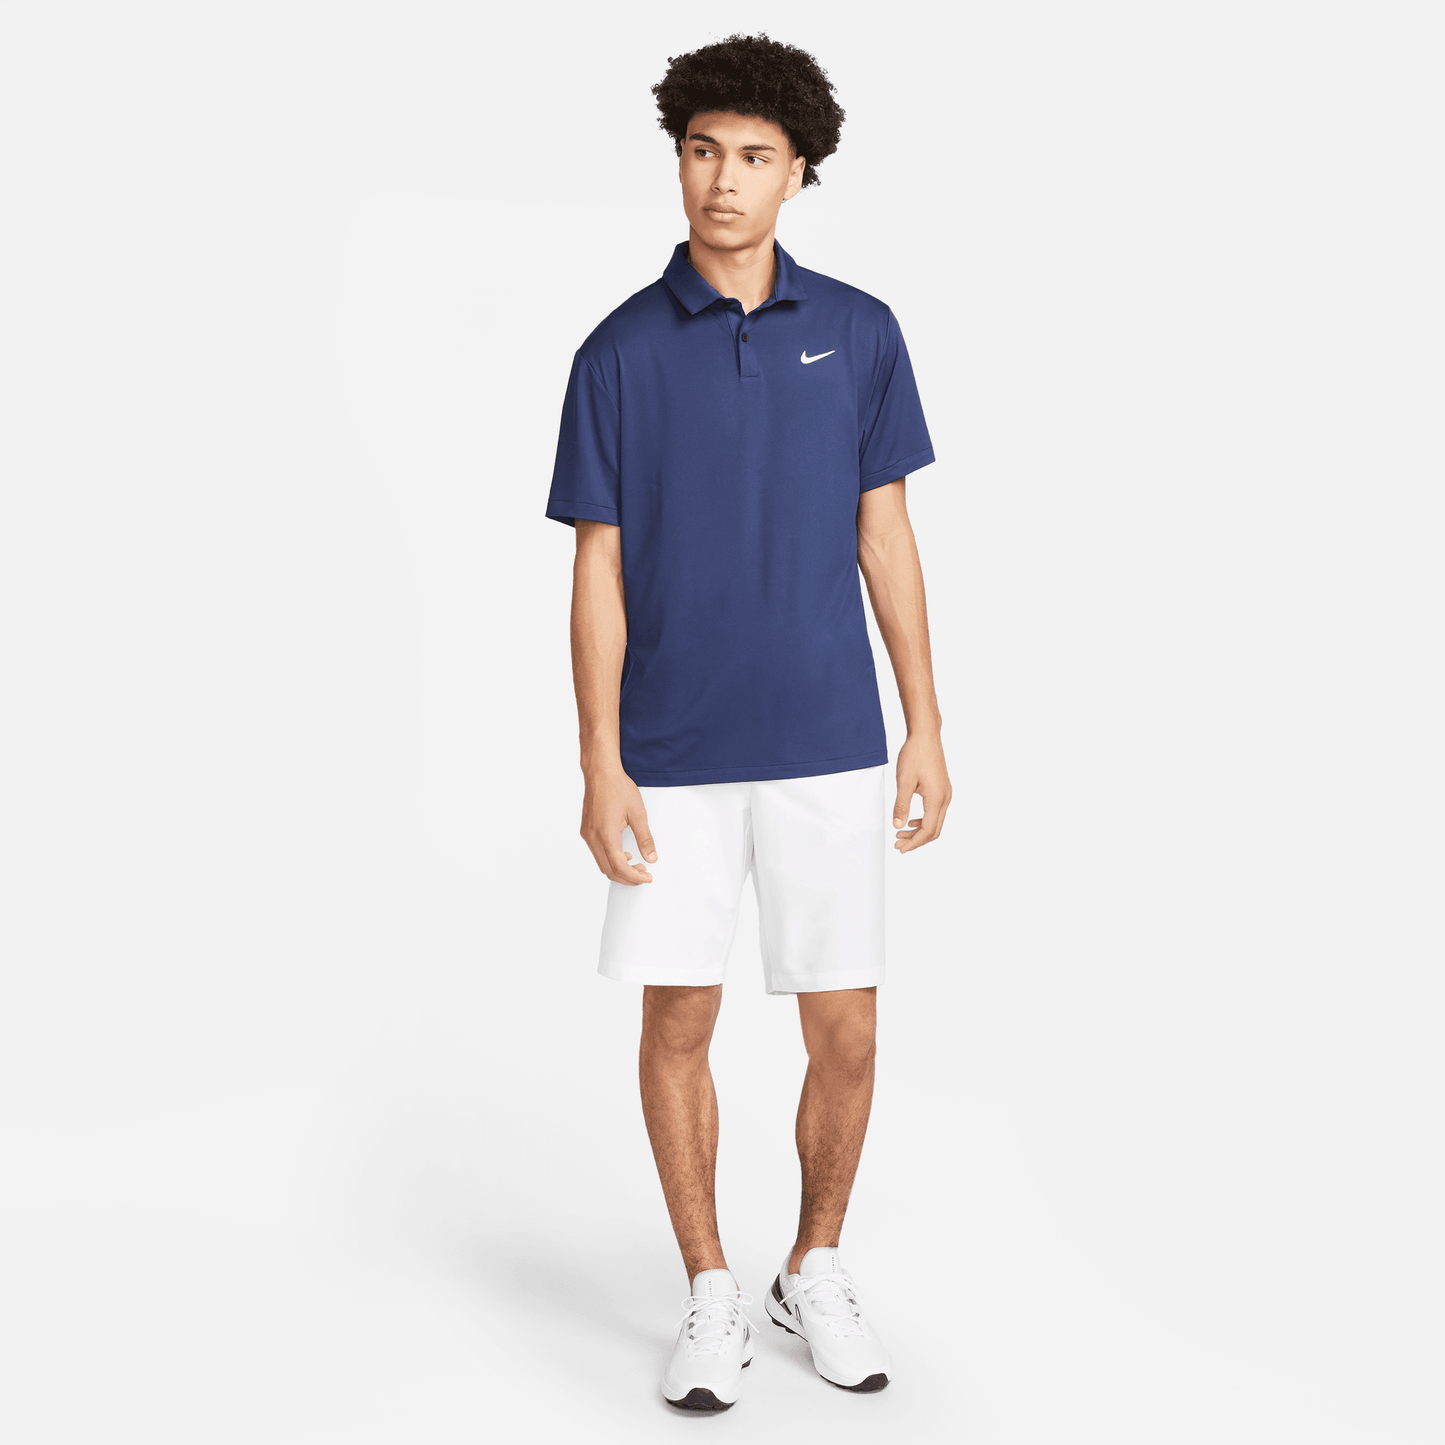 Nike Golf Dri-FIT Tour Solid Polo Shirt DR5298 - 410 Midnight Navy / White 410 M 